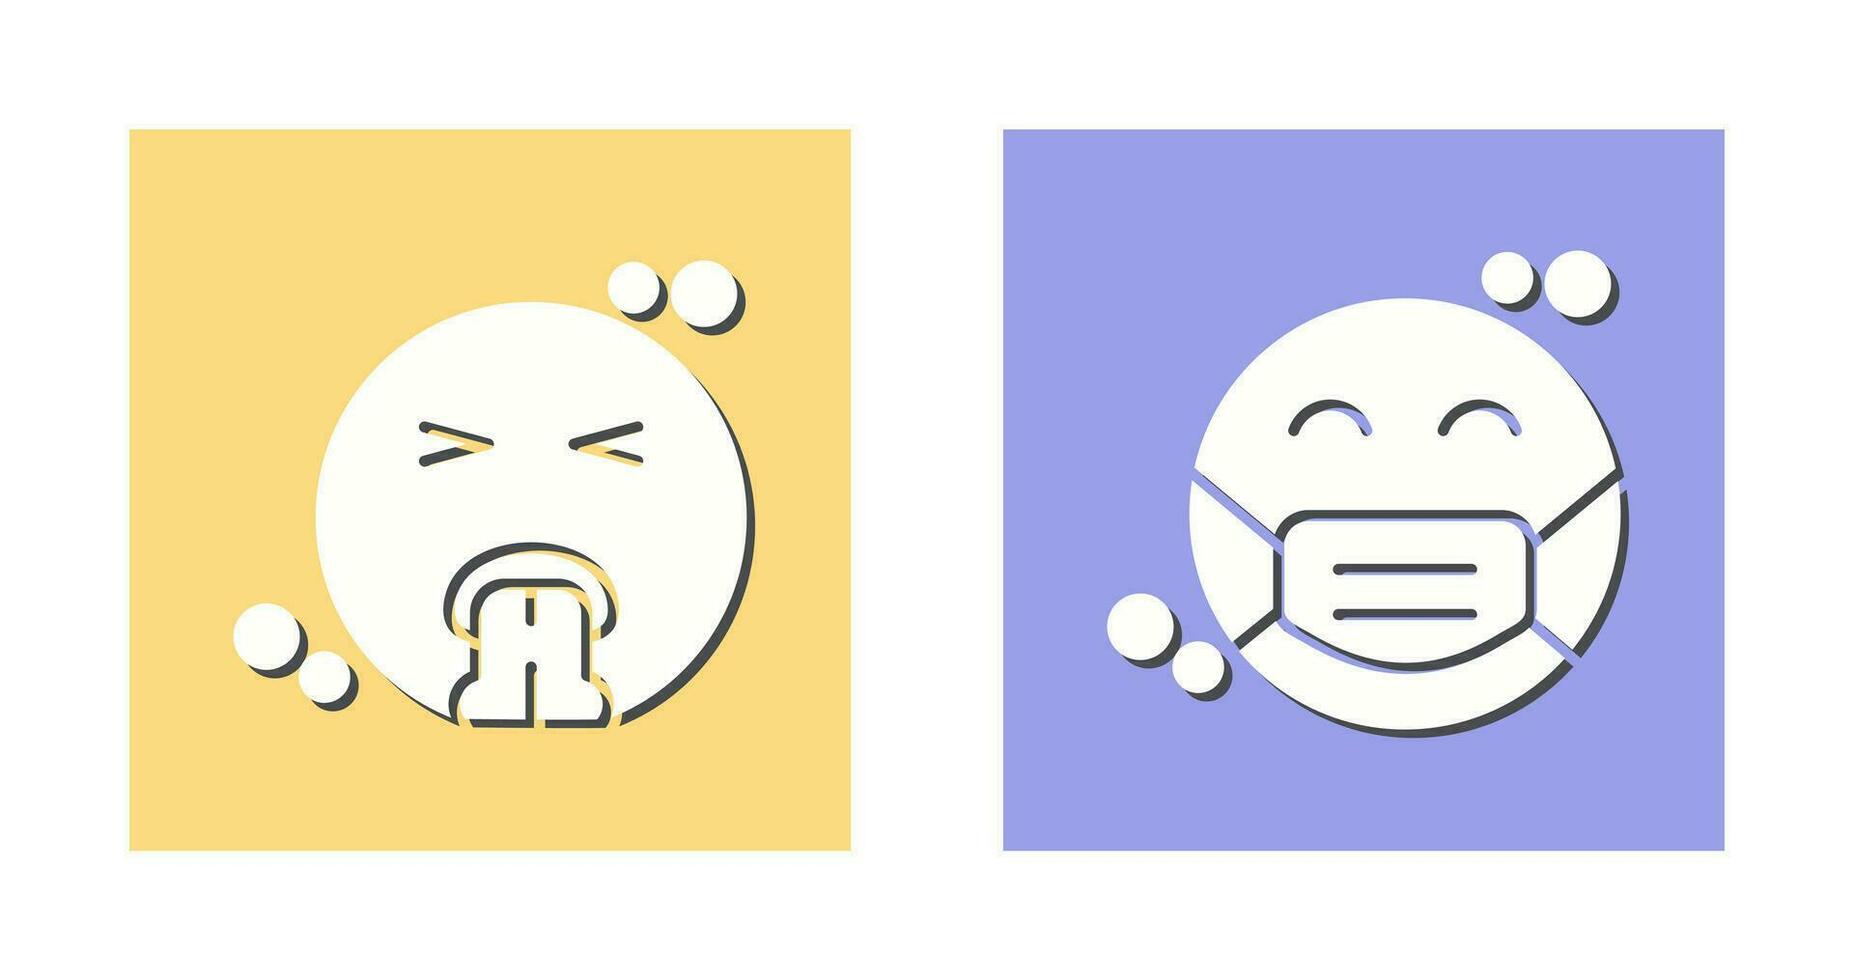 Vomit and Mask Icon vector